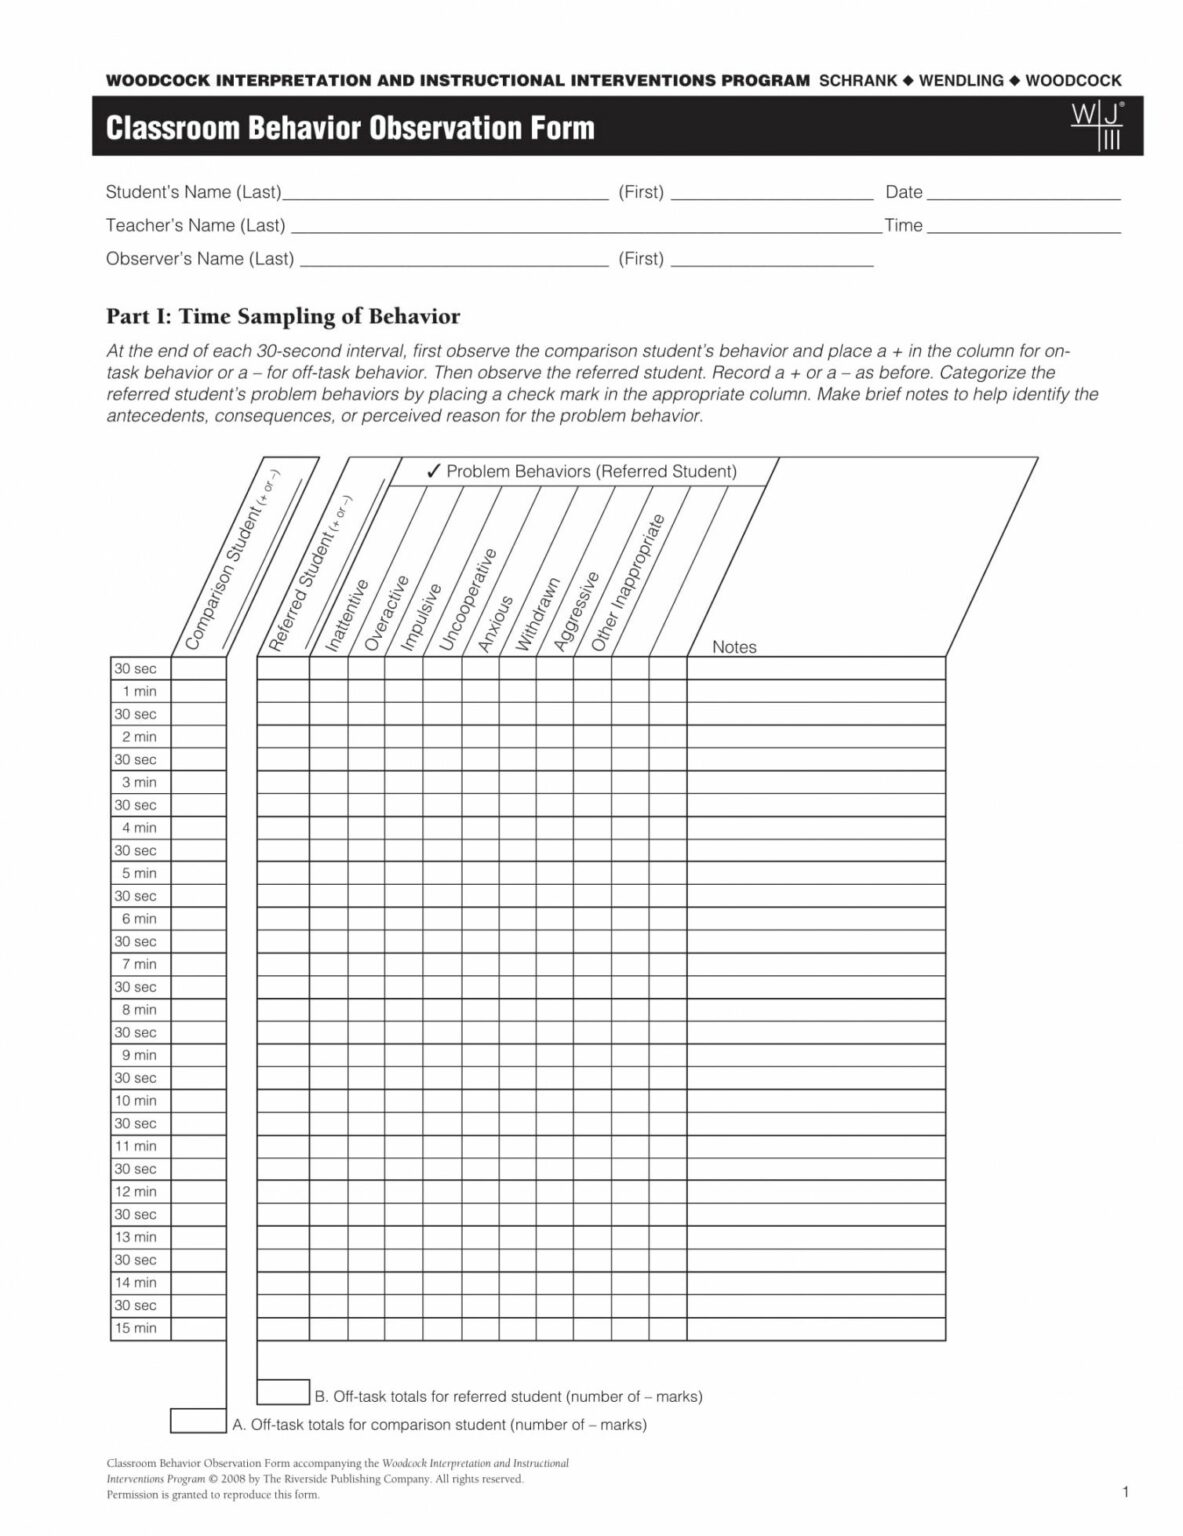 printable-free-4-behavior-observation-forms-in-pdf-ms-word-student